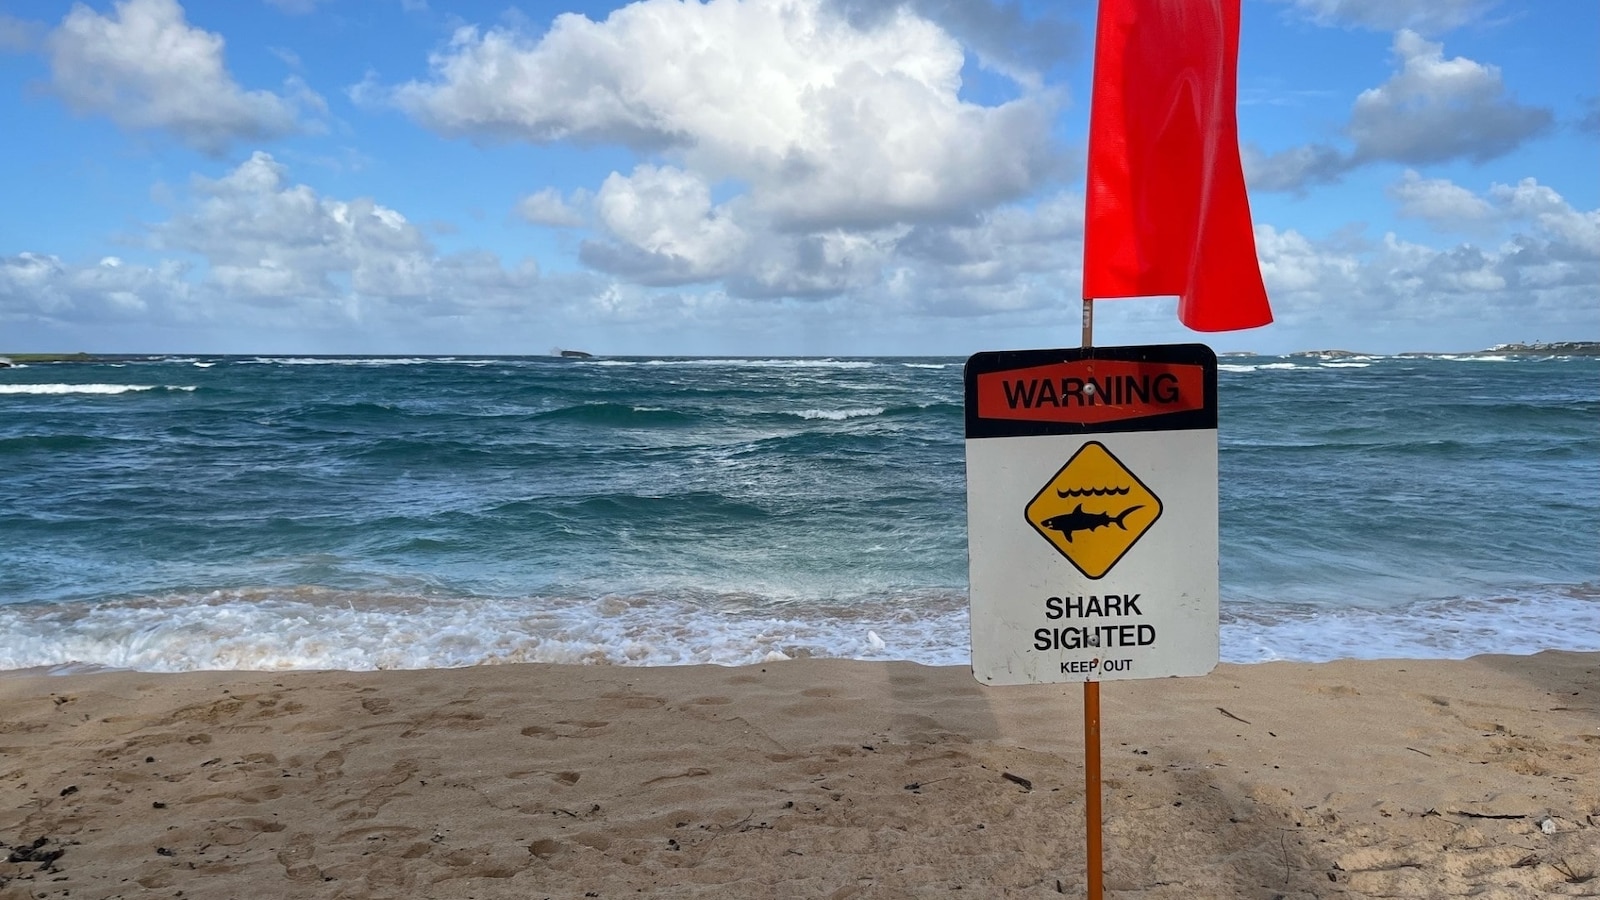 Pipeline surfer killed in shark attack in Hawaii, emergency officials say